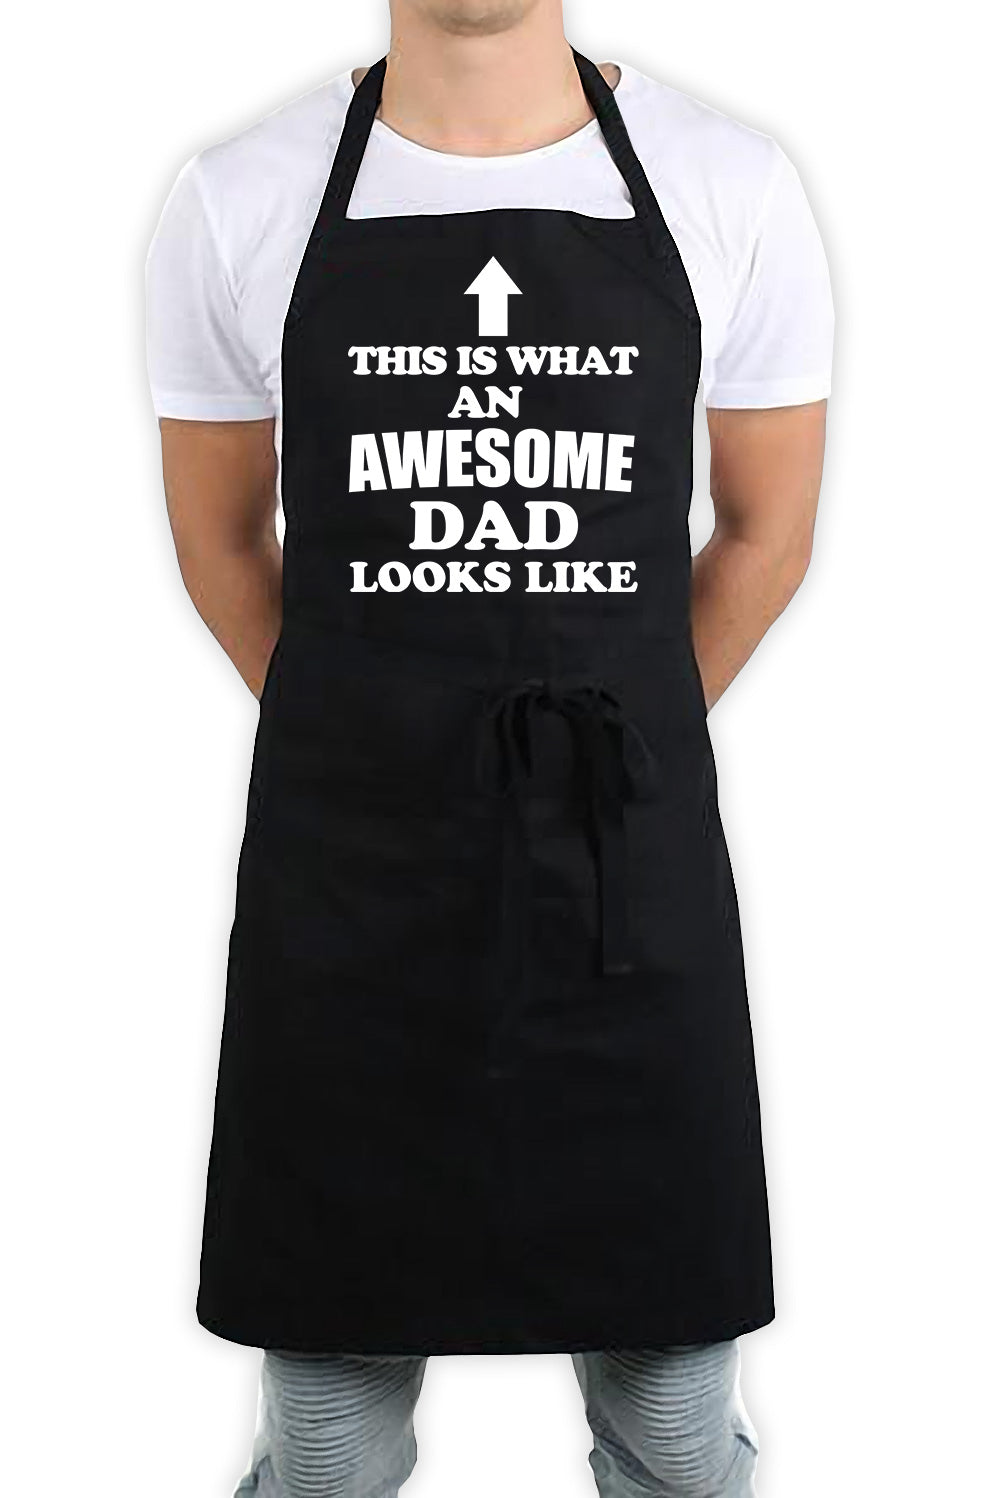 This Is What An Awesome Dad Looks Like Funny Kitchen BBQ Apron Black